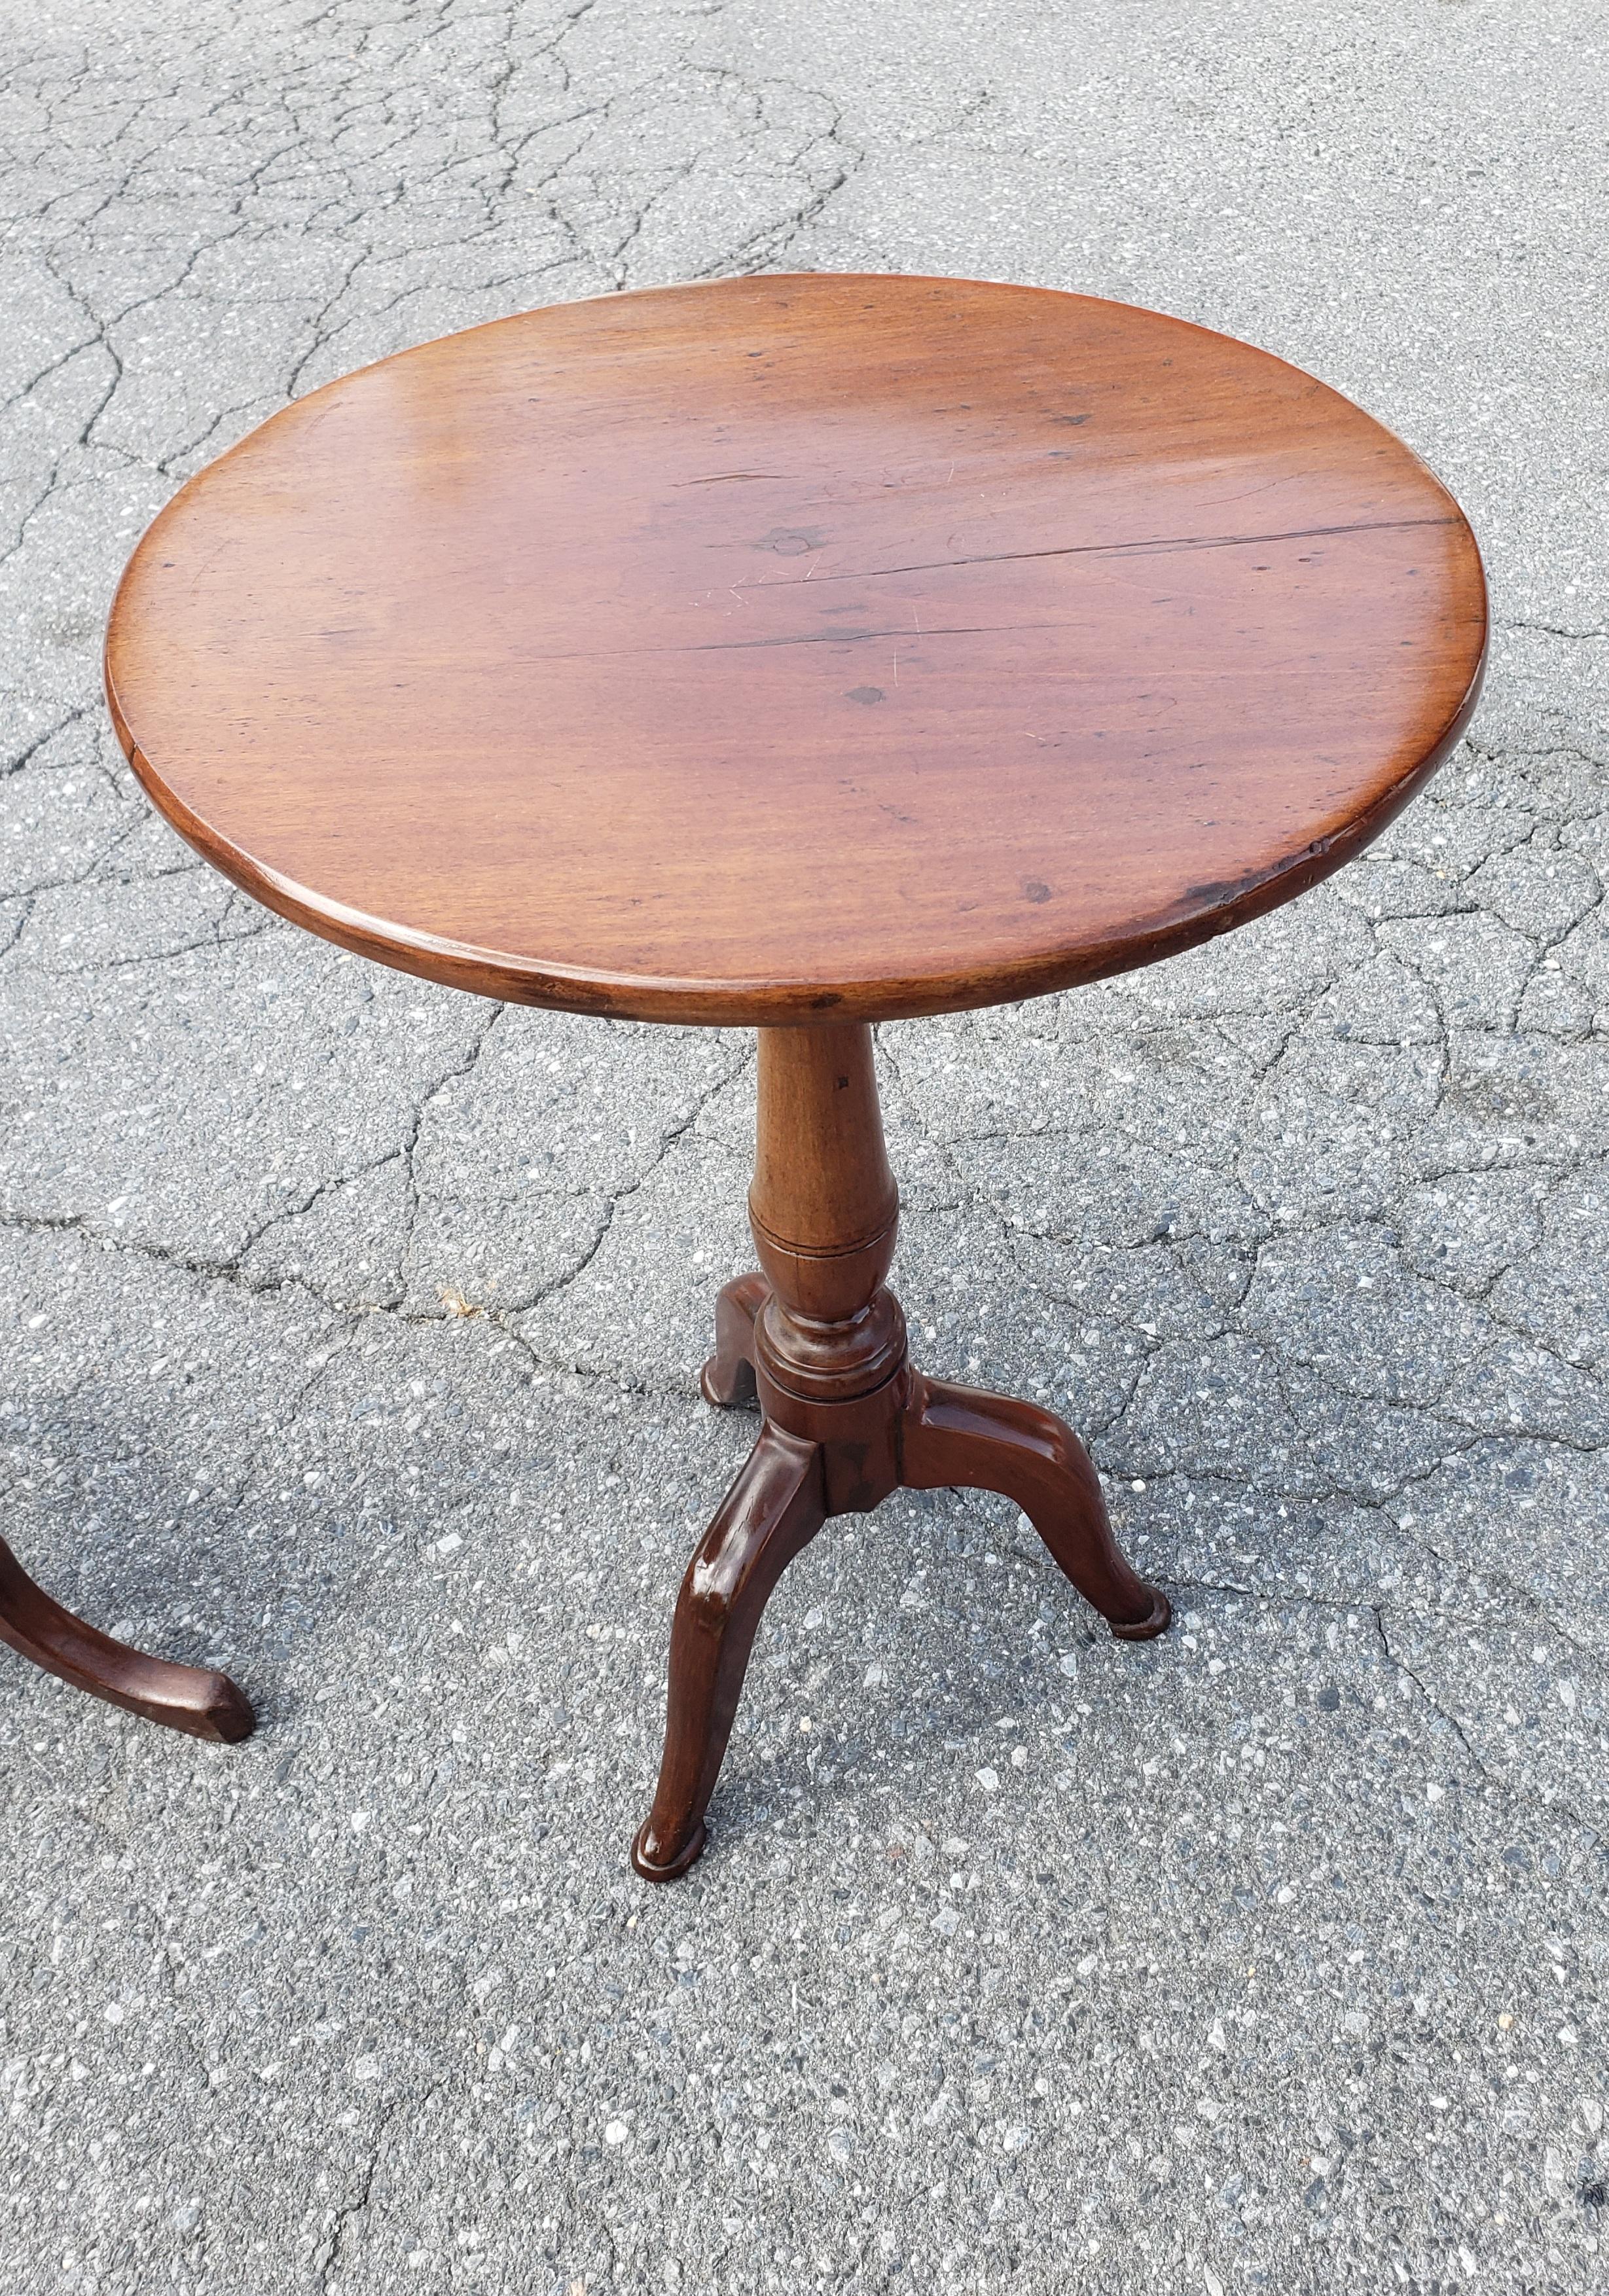 19th Century Victorian Mahogany Tripod Pedestal Candle Stand In Good Condition For Sale In Germantown, MD